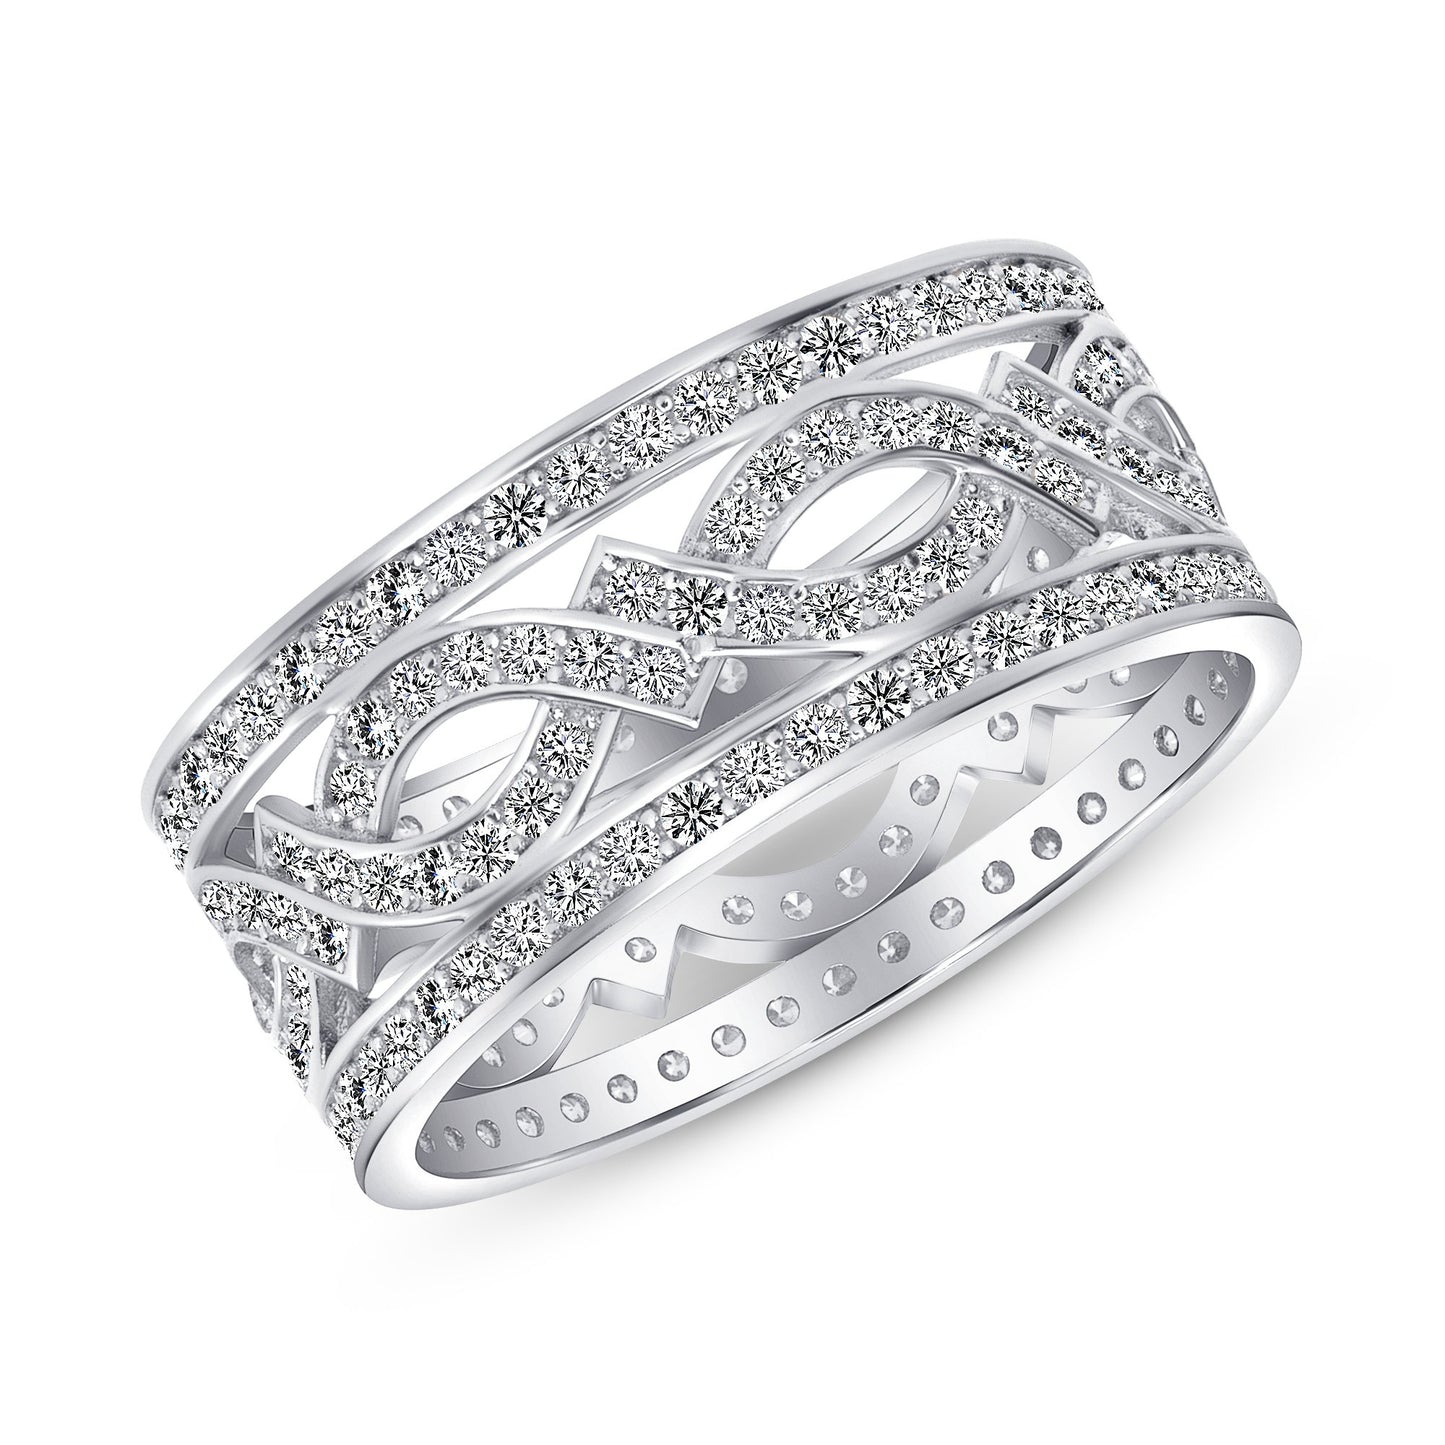 YZK1046. Silver 925 Rhodium Plated Wide Design Band Ring